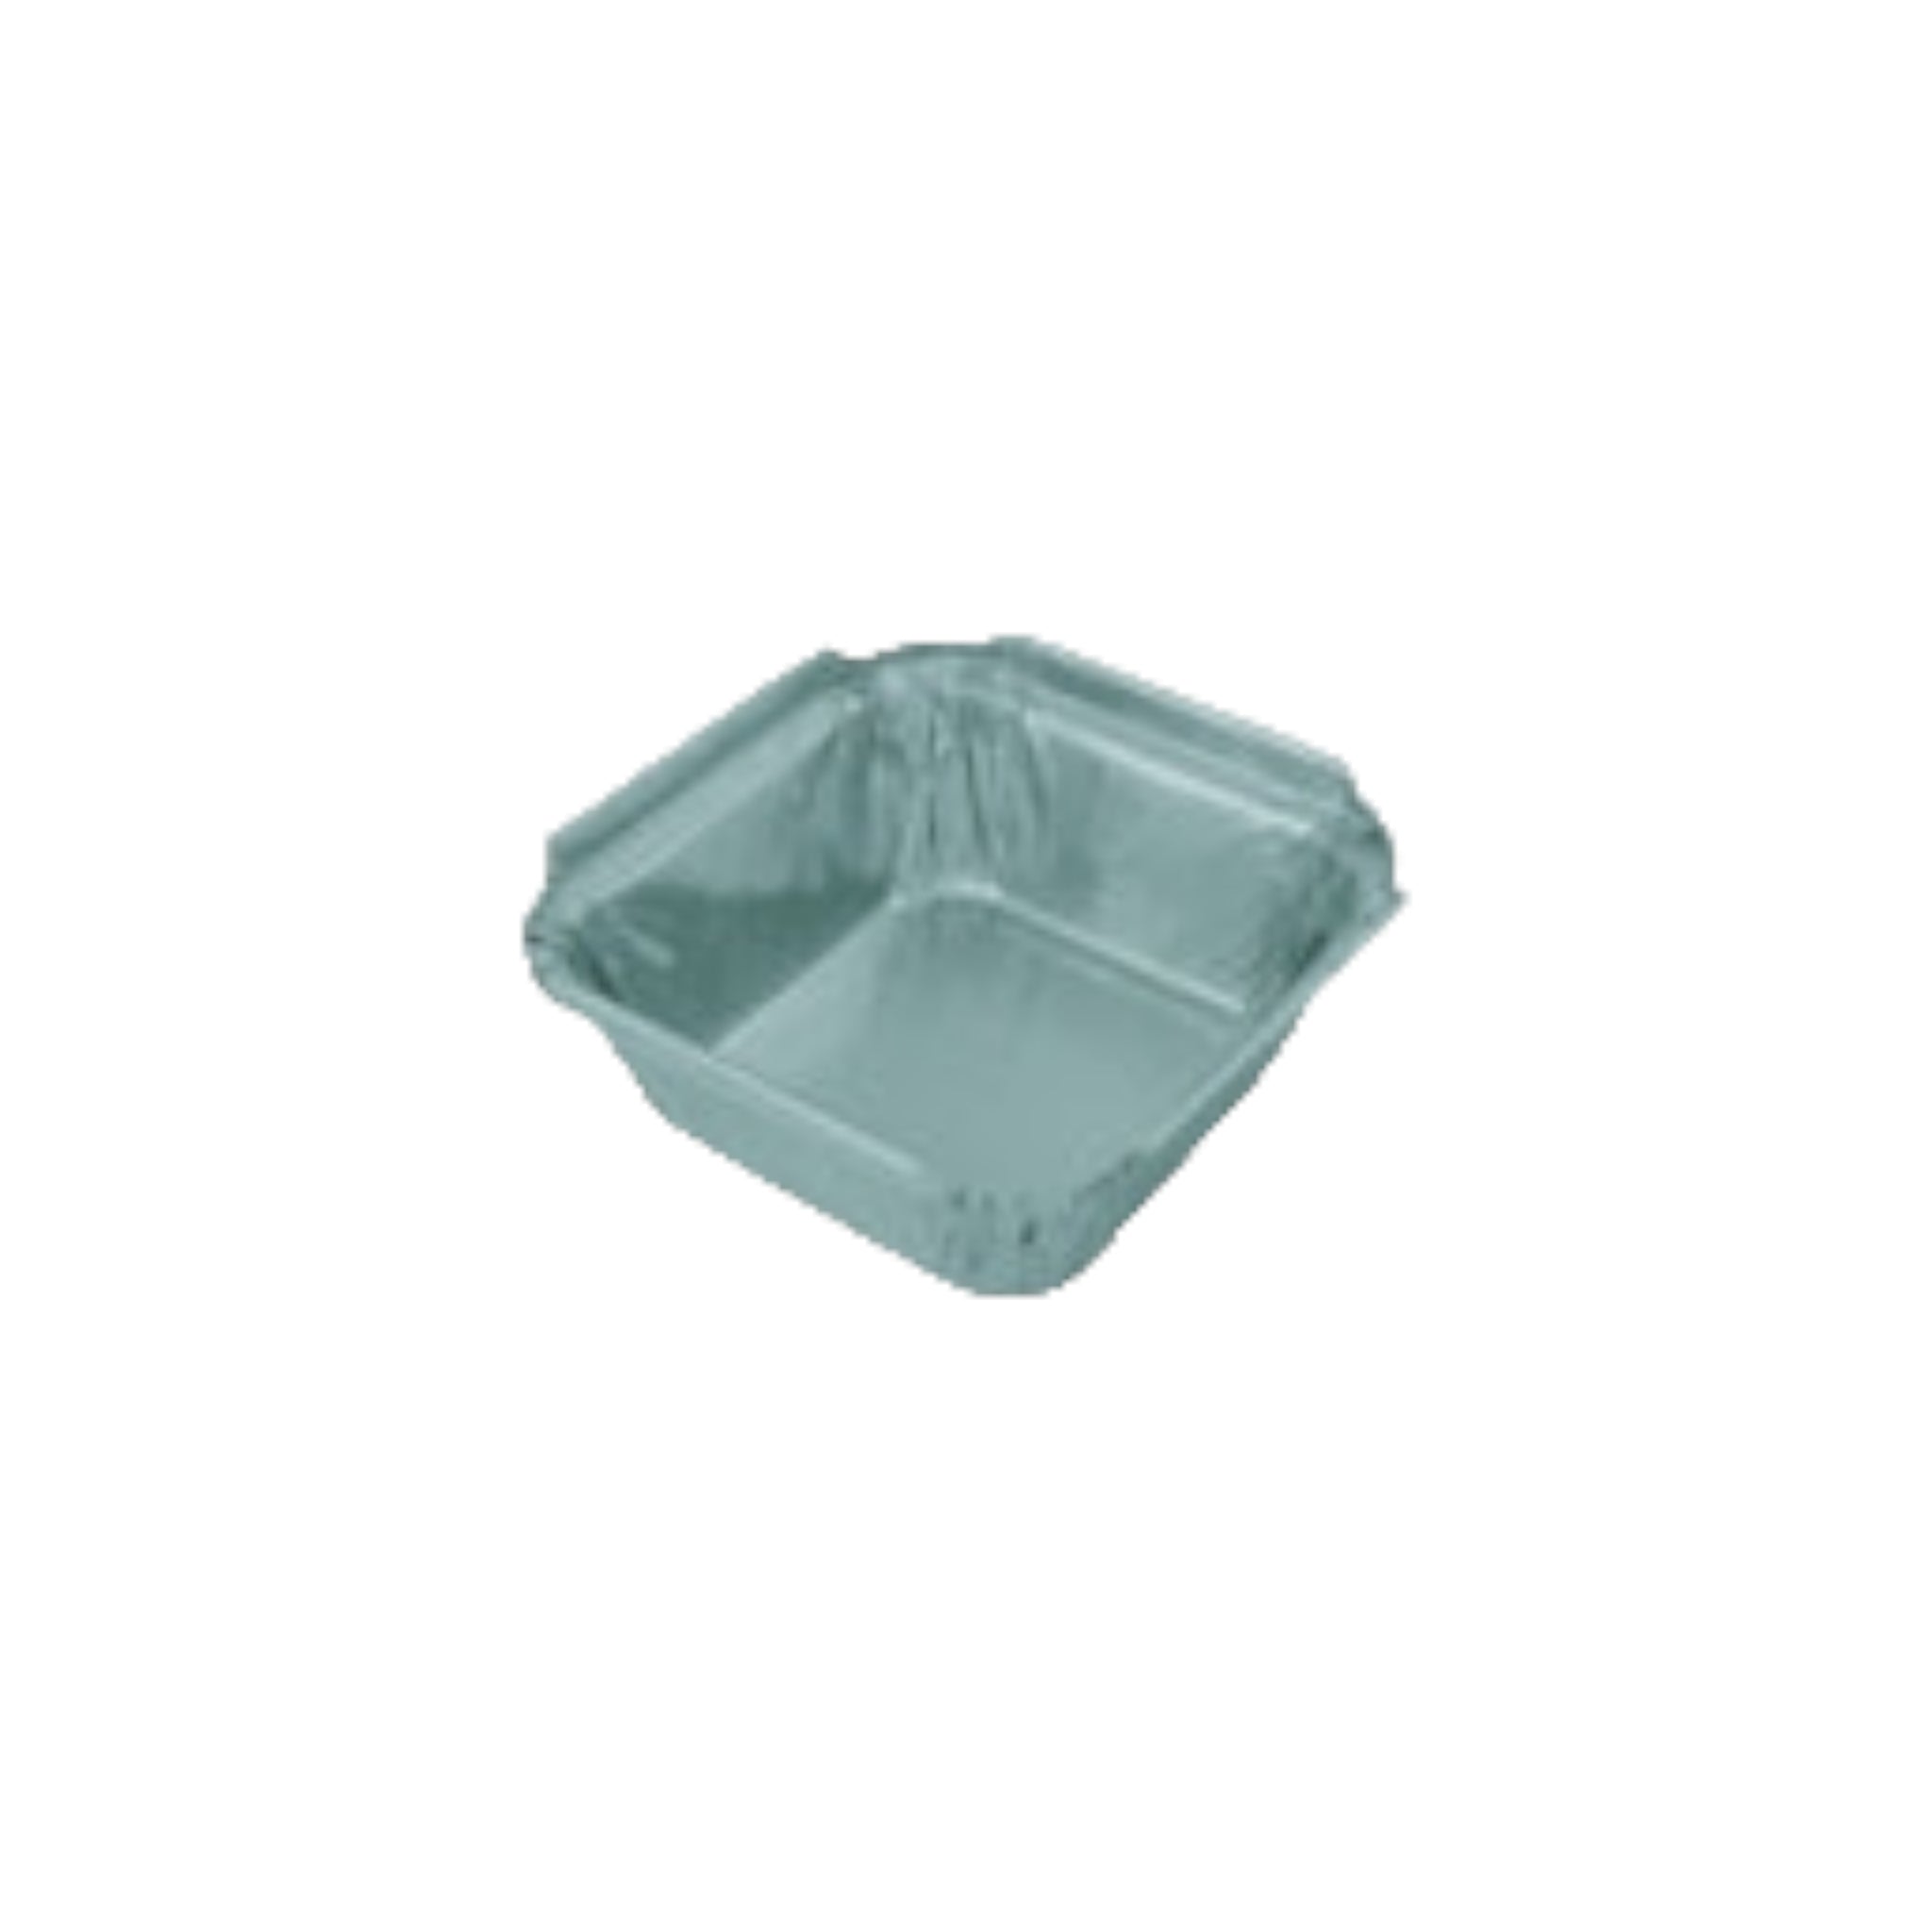 Aluminum Foil Takeaway Container Disposable Square FG-445PD with Clear Poly PVC LID 4453P 10pack